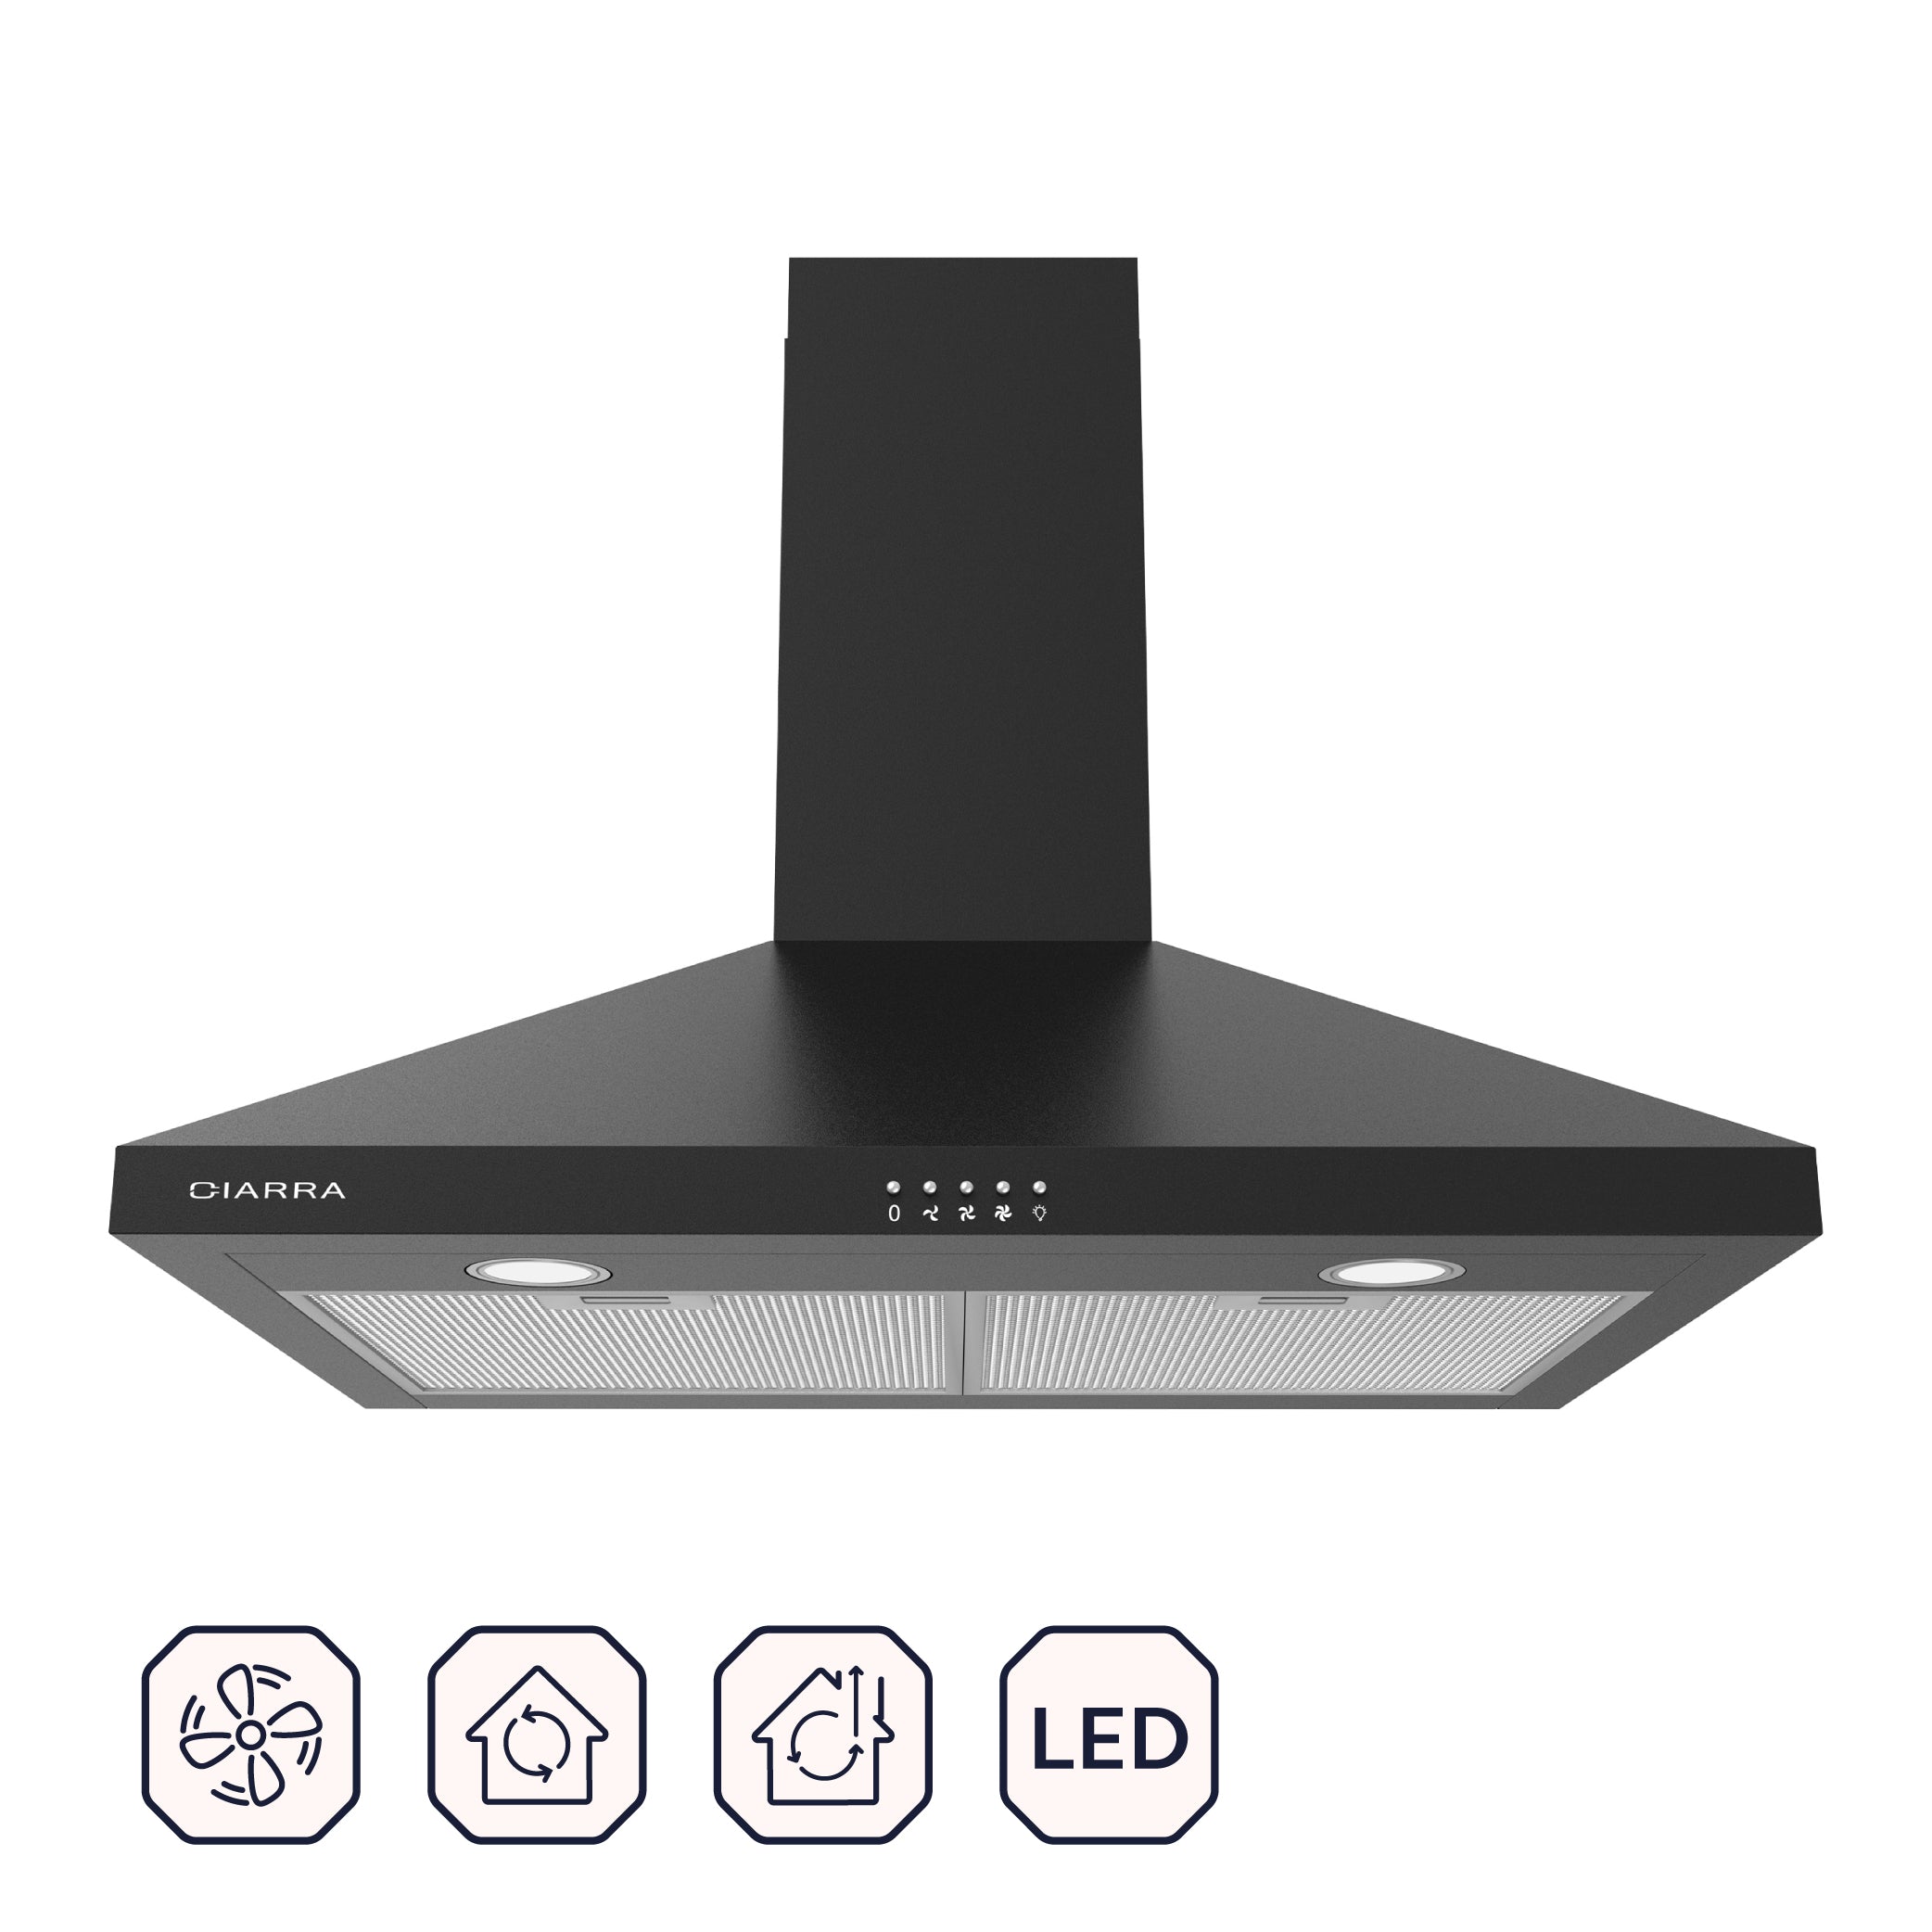 30 inch Wall Mount Range Hood in Stainless Steel Stove Vent Hood with Aluminum Filters 3 Speed Exhaust Fan Button Control - Black